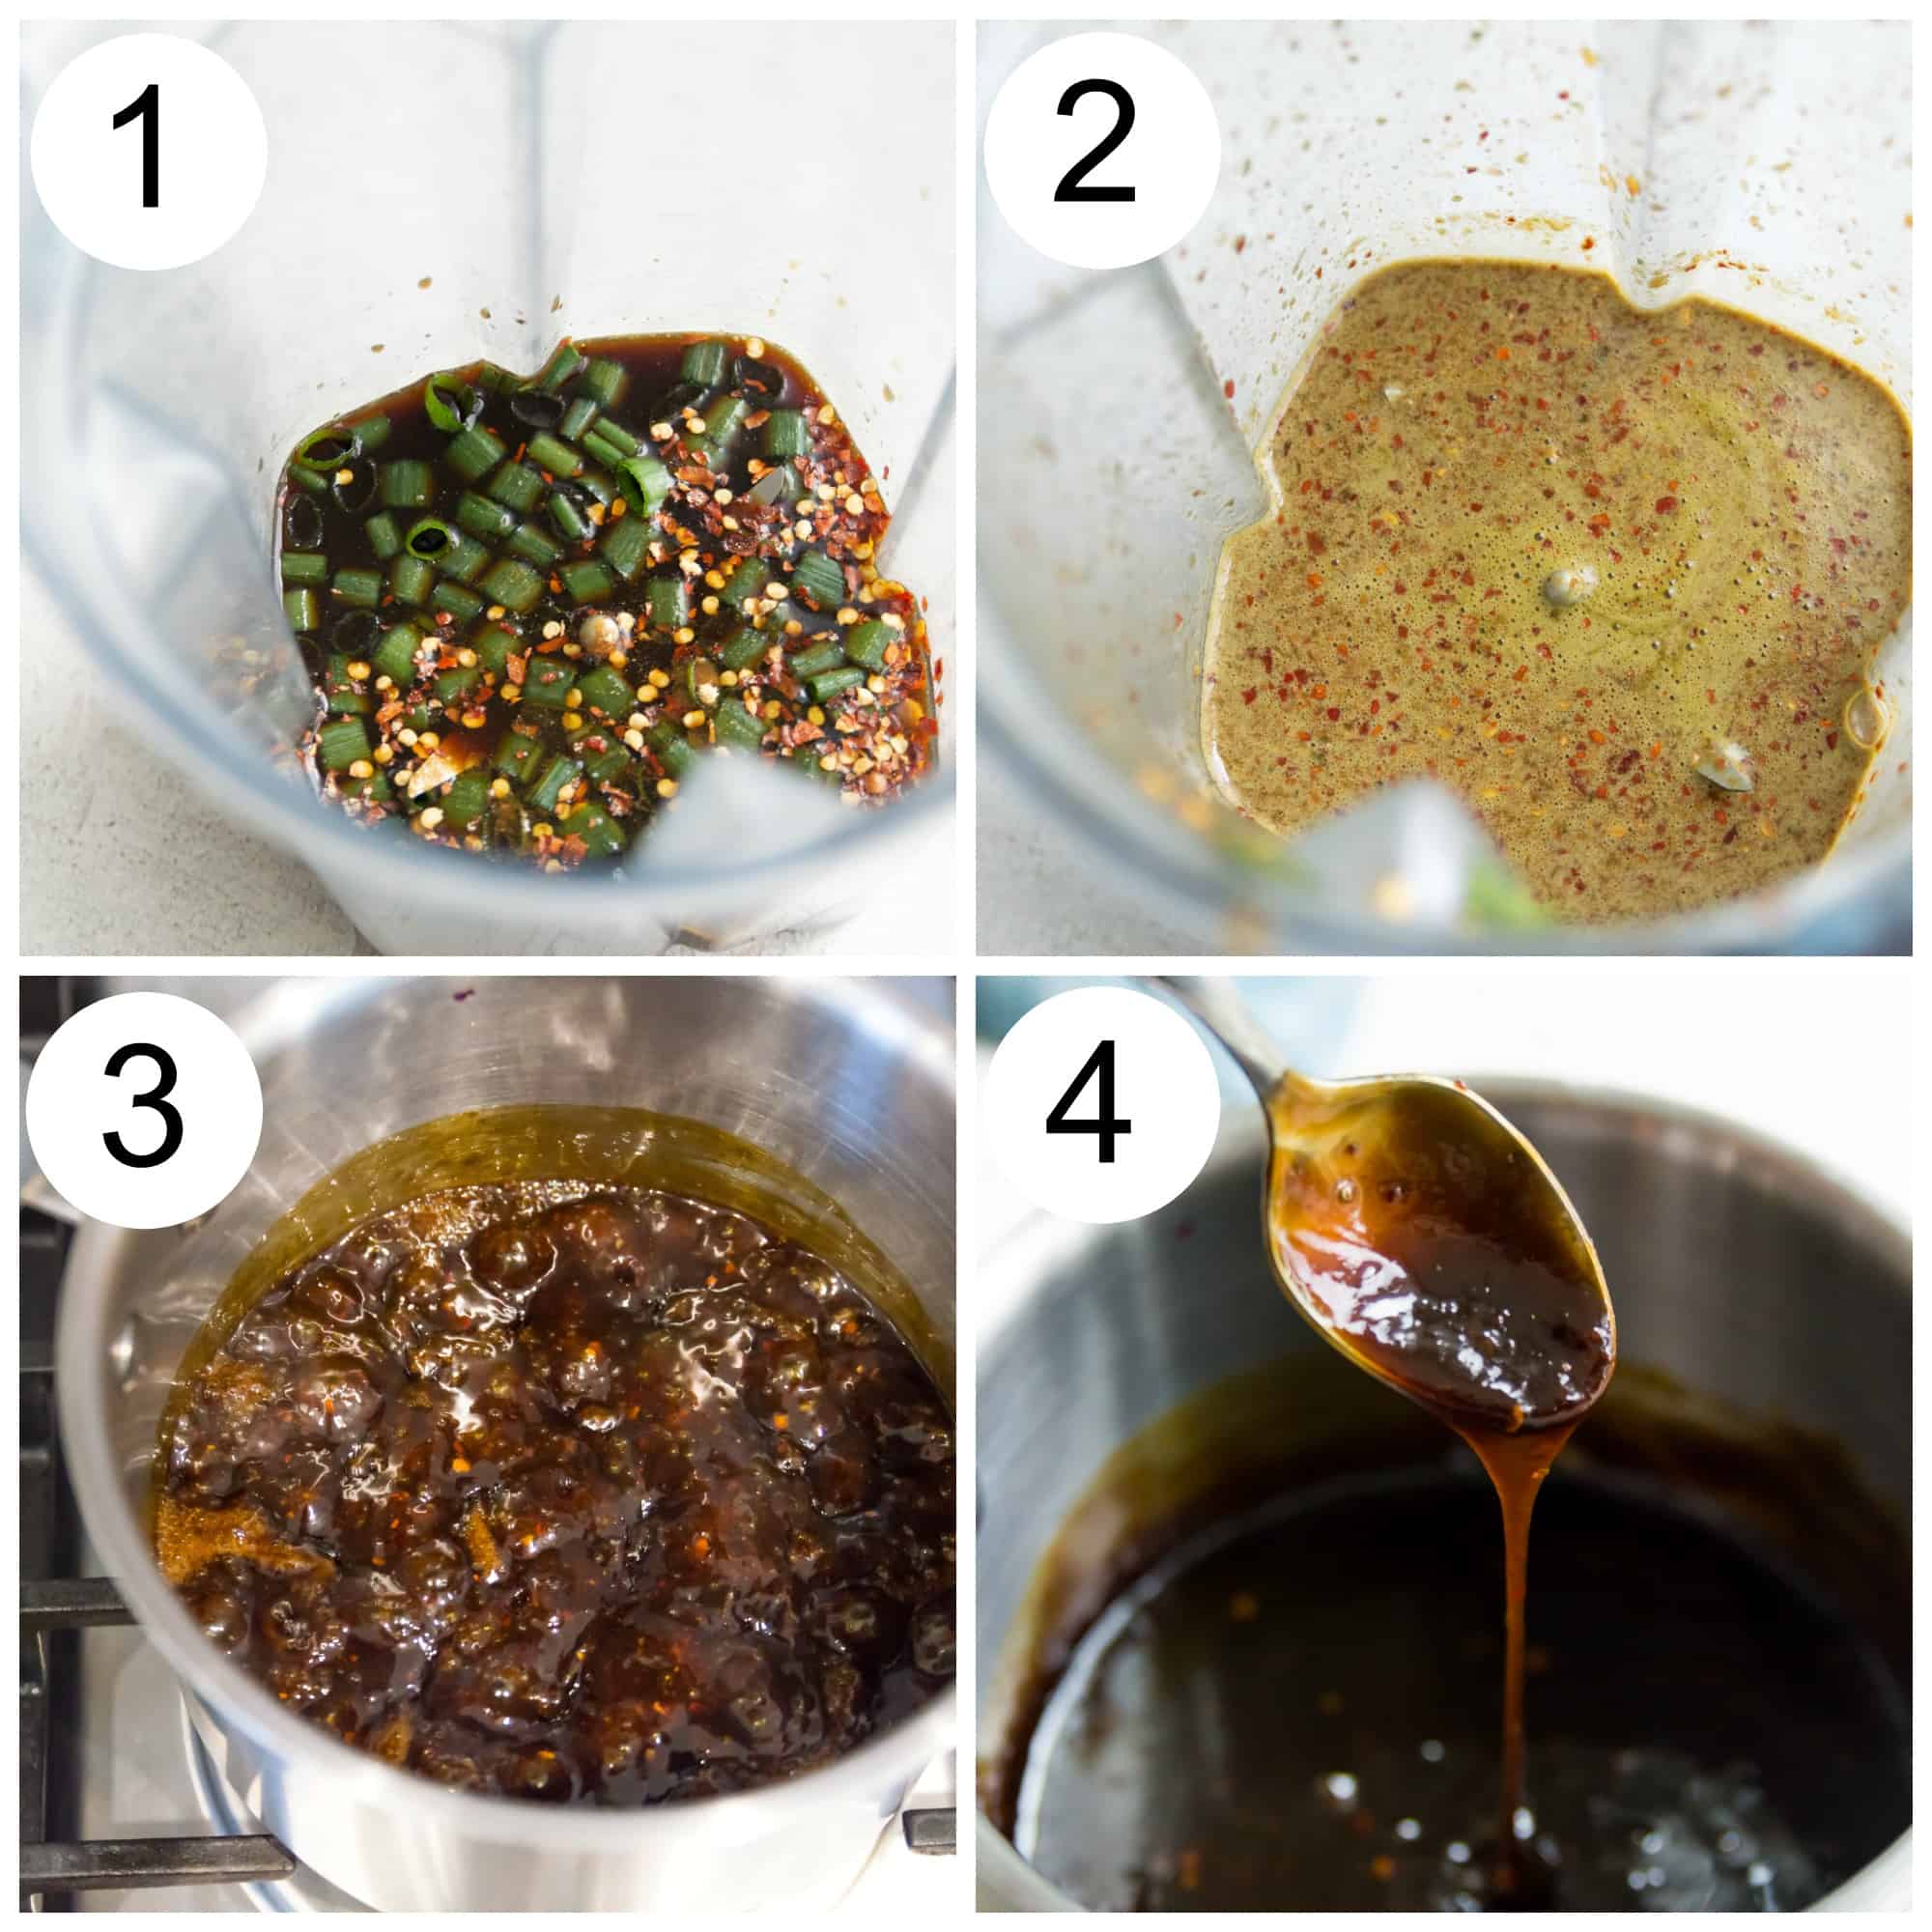 Step by step directions for making homemade teriyaki sauce. 